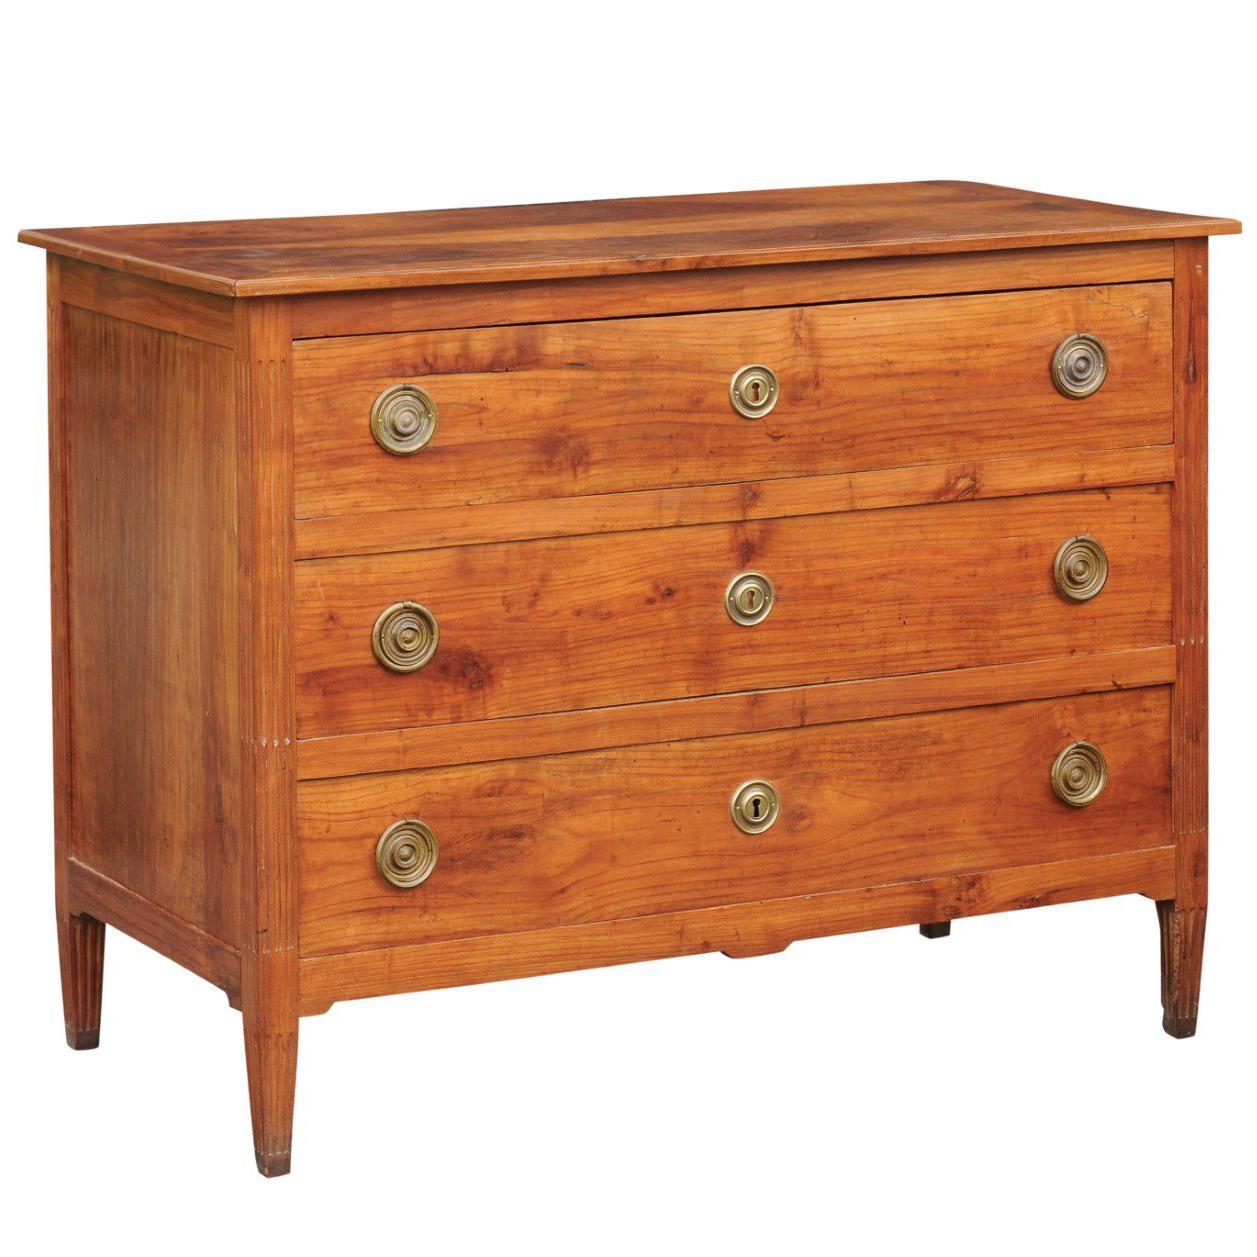 French Louis XVI Style 1840s Walnut Three-Drawer Commode with Butterfly Veneer